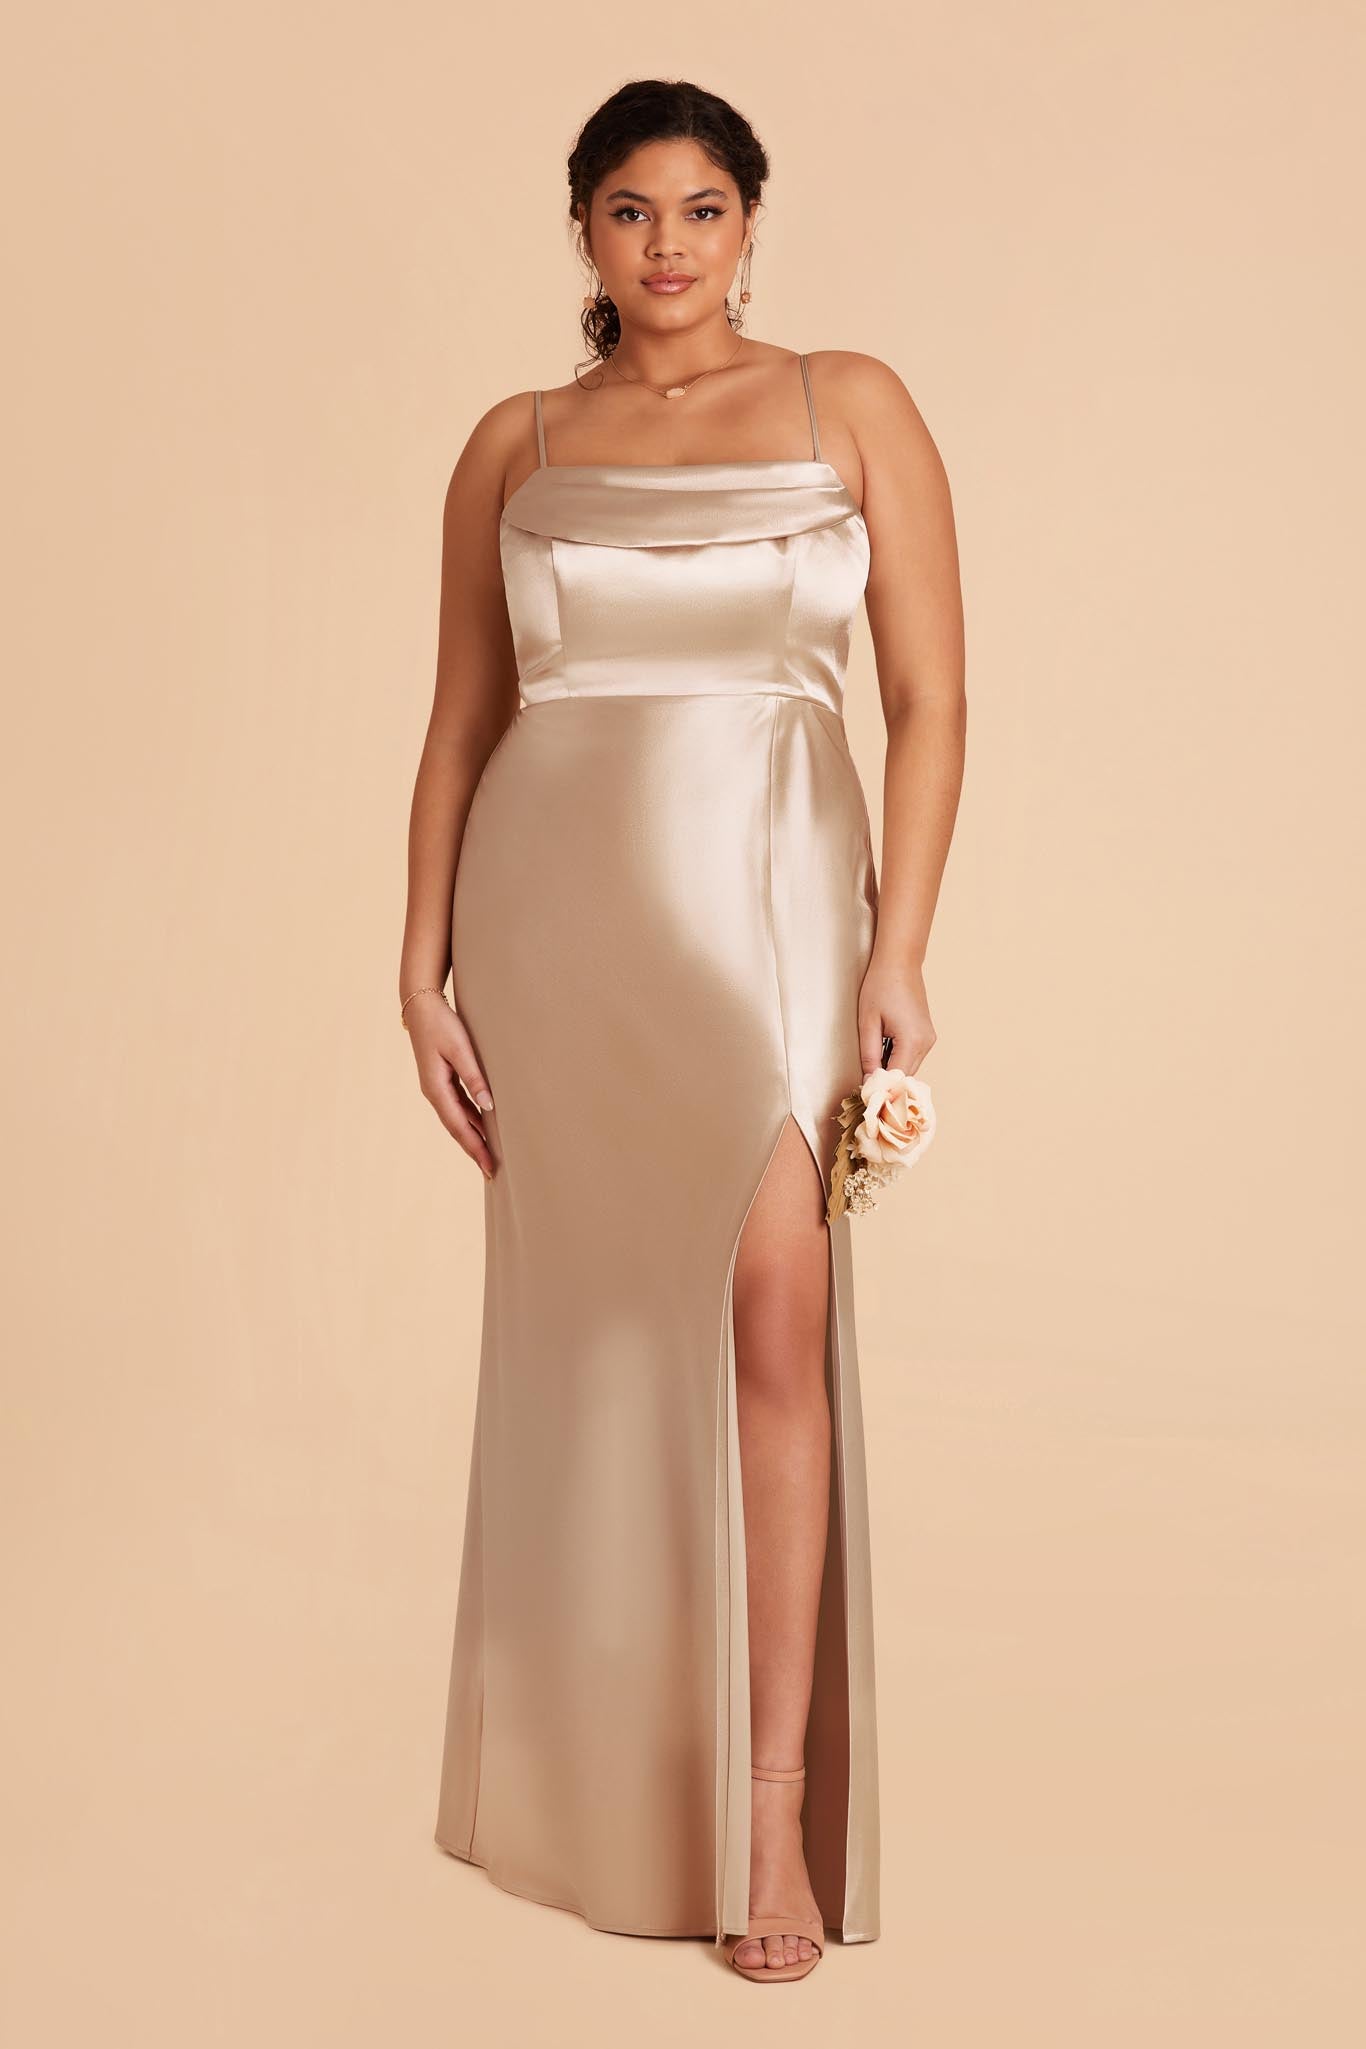 Neutral Champagne Mia Convertible Dress by Birdy Grey